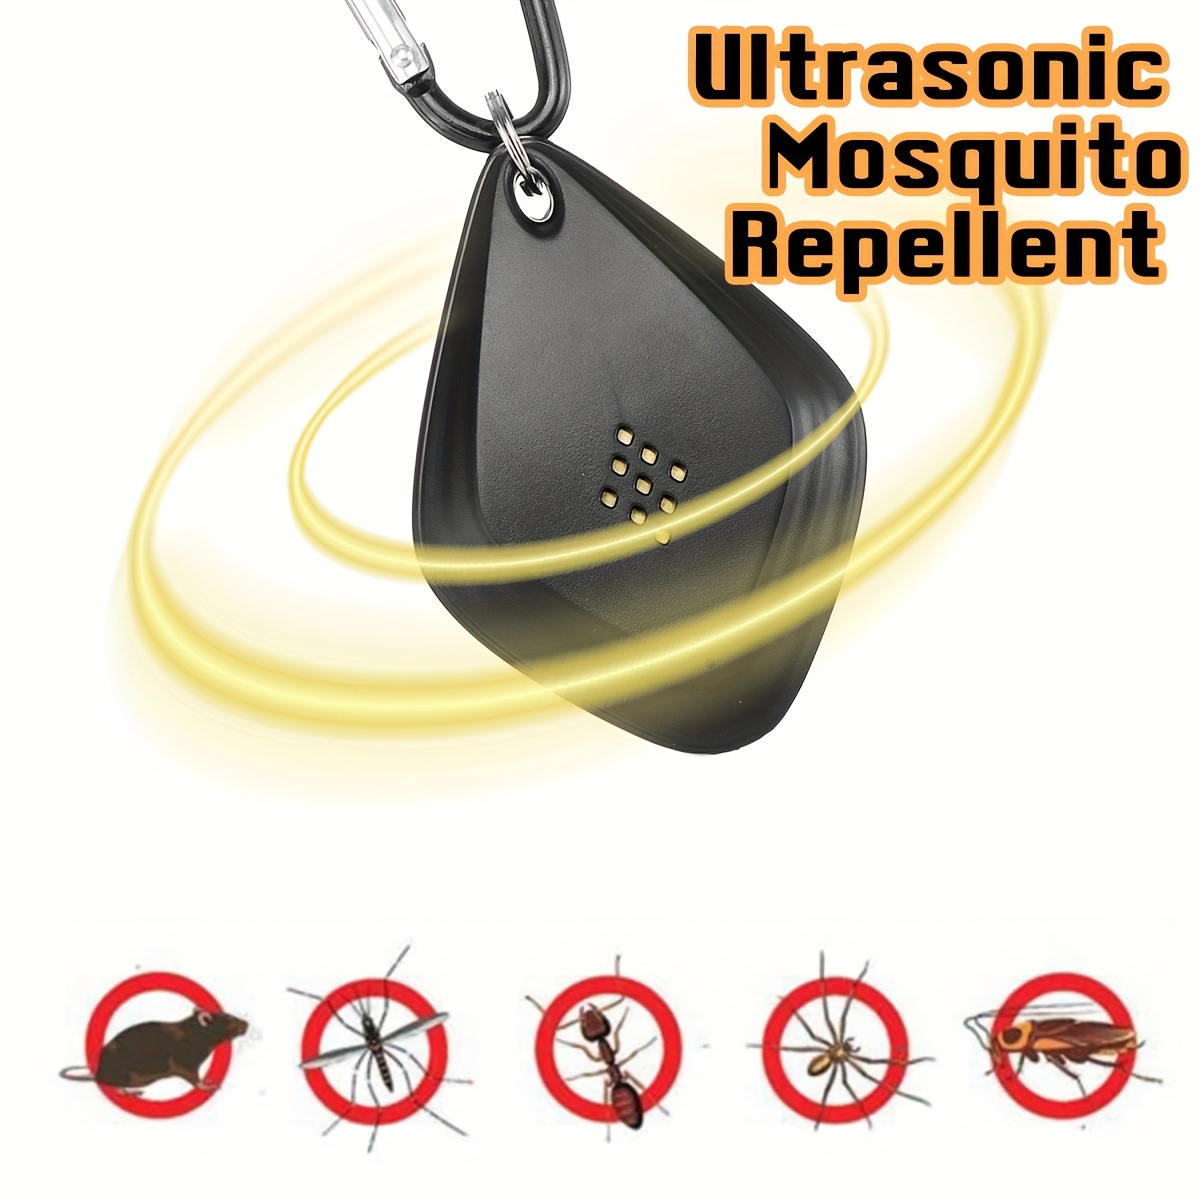 

Portable Ultrasonic Mosquito Repellent - Usb Charging, Intelligent Frequency Conversion, Protects Your Family From Insects